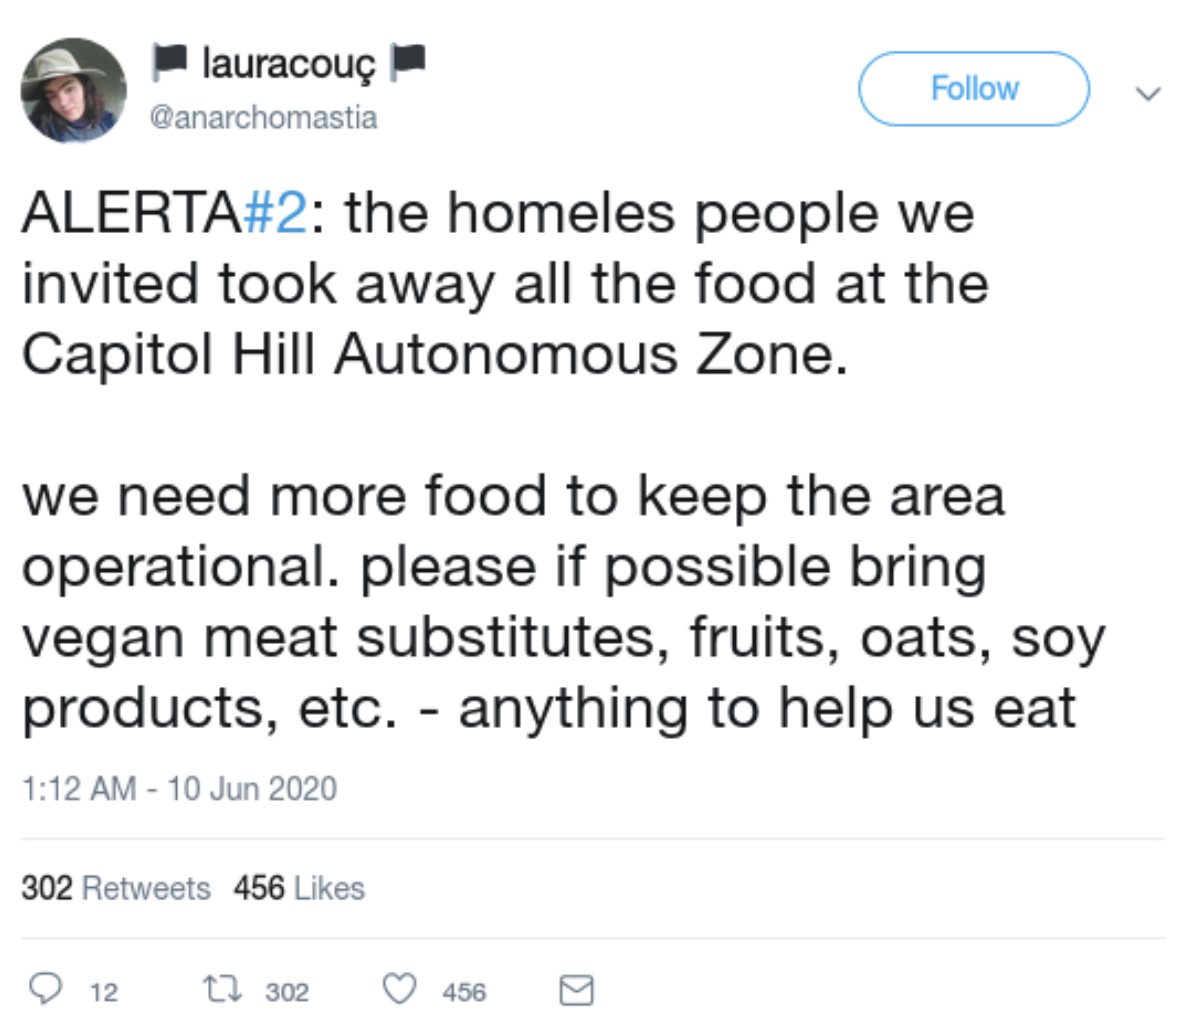 document - lauracou Alerta the homeles people we invited took away all the food at the Capitol Hill Autonomous Zone. we need more food to keep the area operational. please if possible bring vegan meat substitutes, fruits, oats, soy products, etc. anything